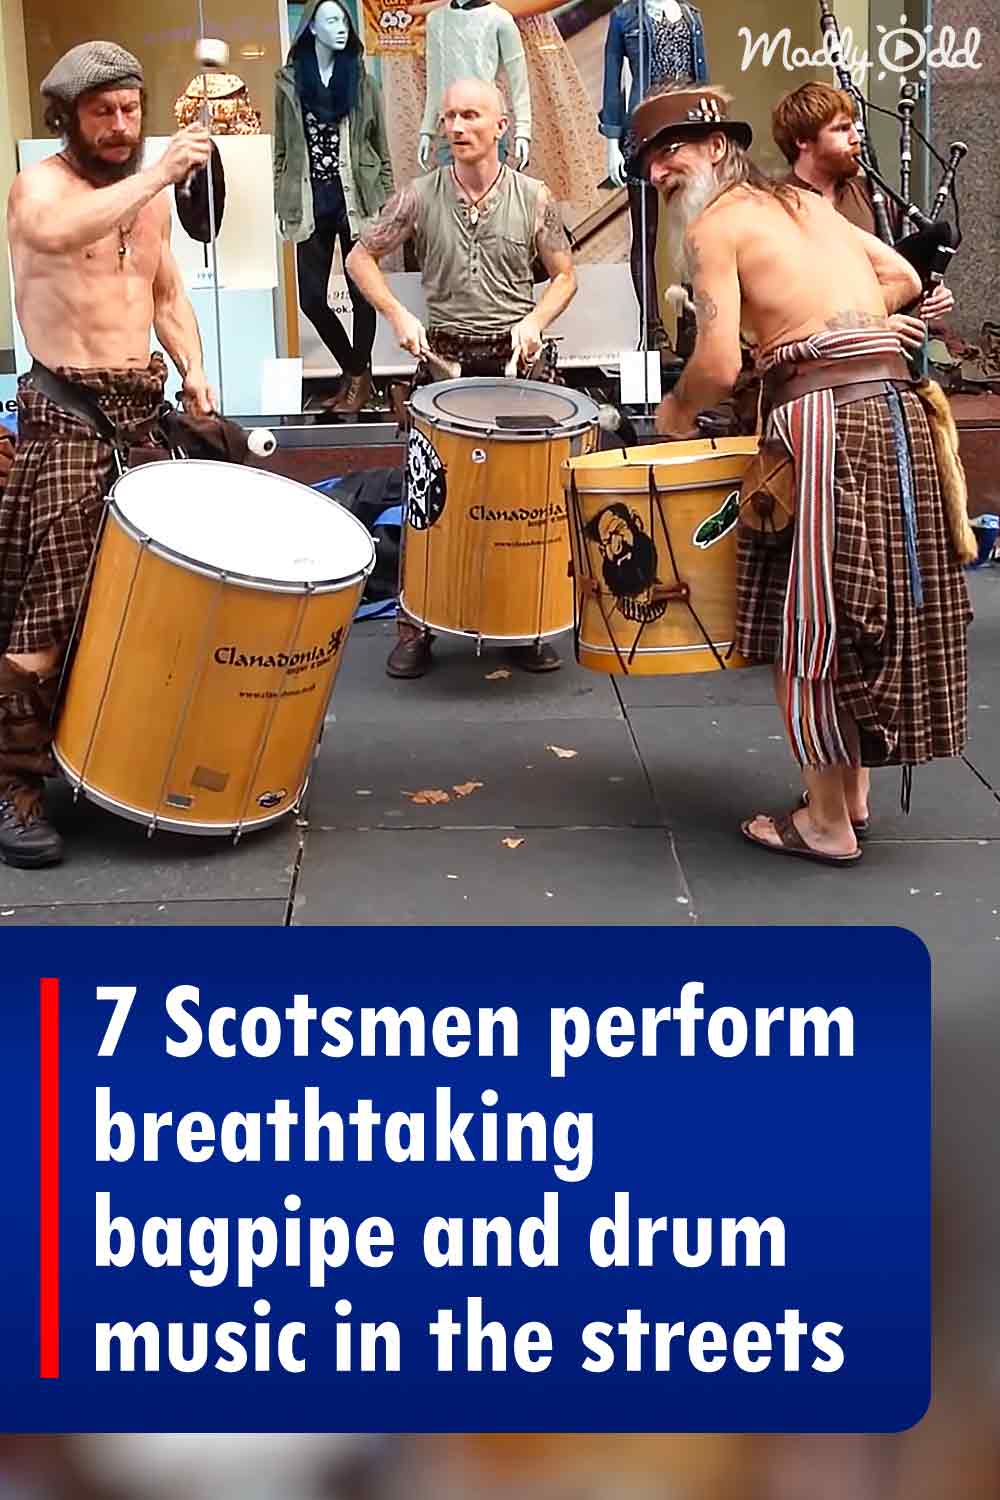 7 Scotsmen perform breathtaking bagpipe and drum music in the streets